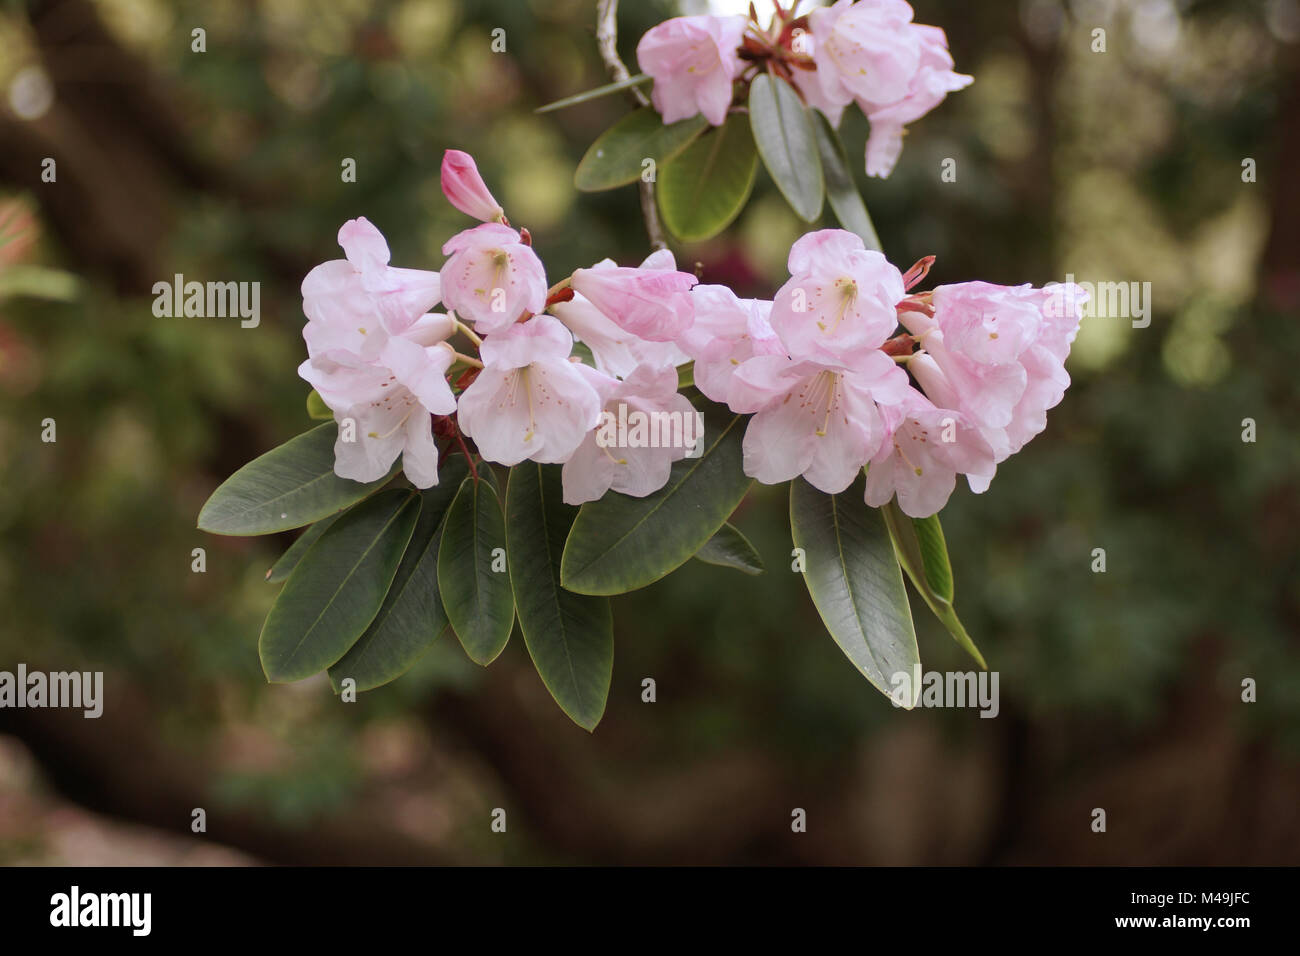 Rhododendron hybrid Stock Photo